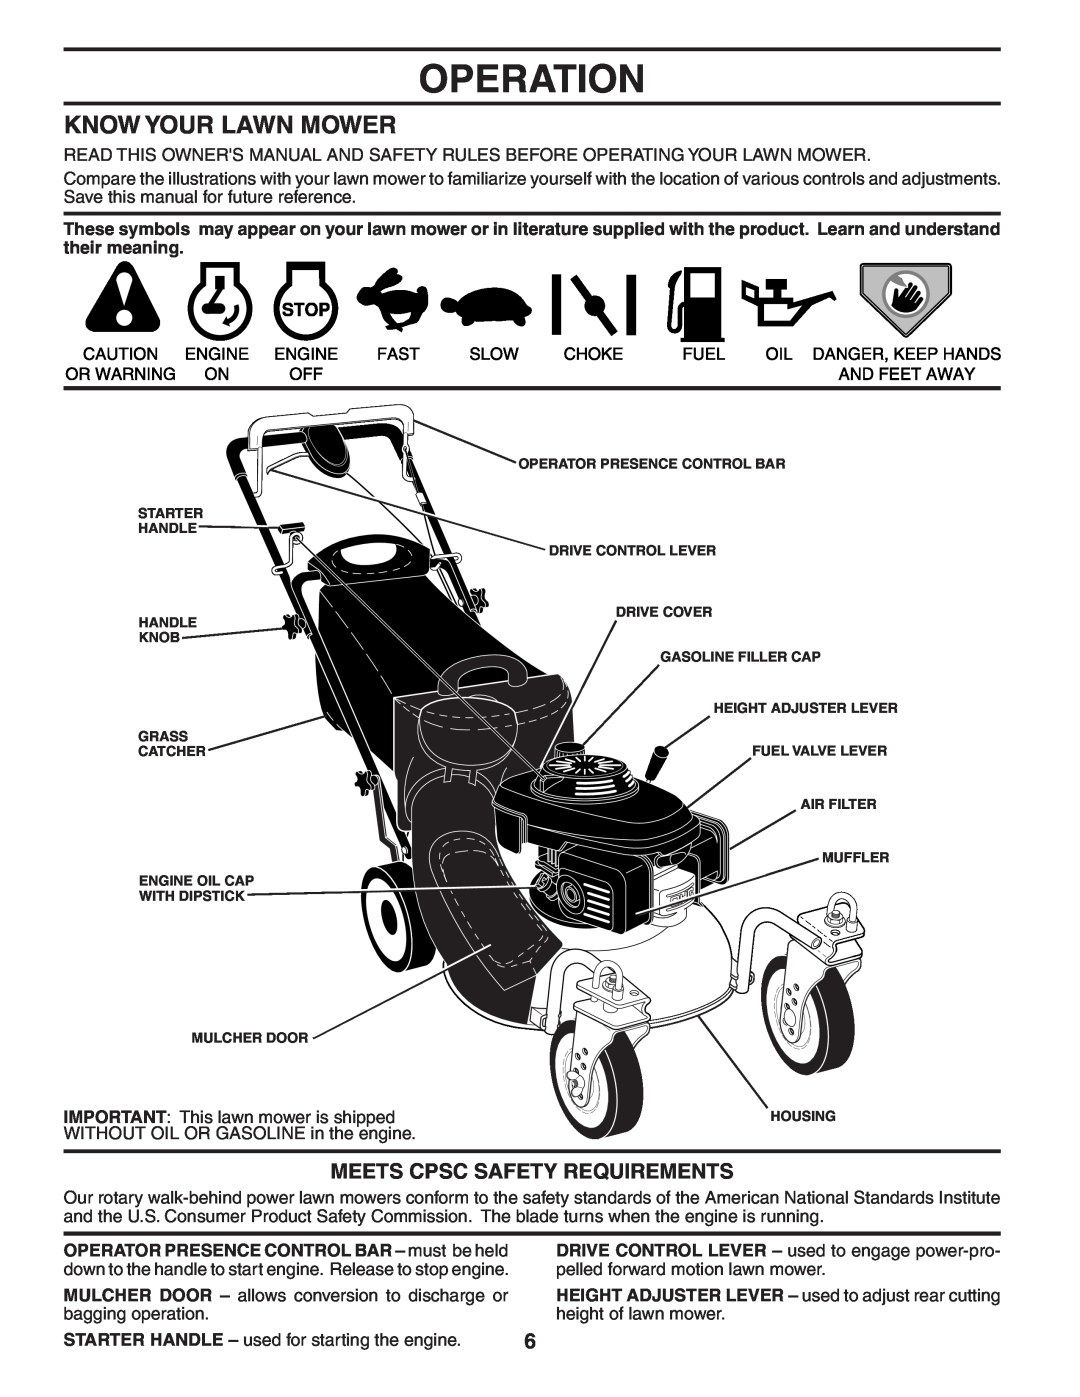 Husqvarna 55C21HV owner manual Operation, Know Your Lawn Mower, Meets Cpsc Safety Requirements 